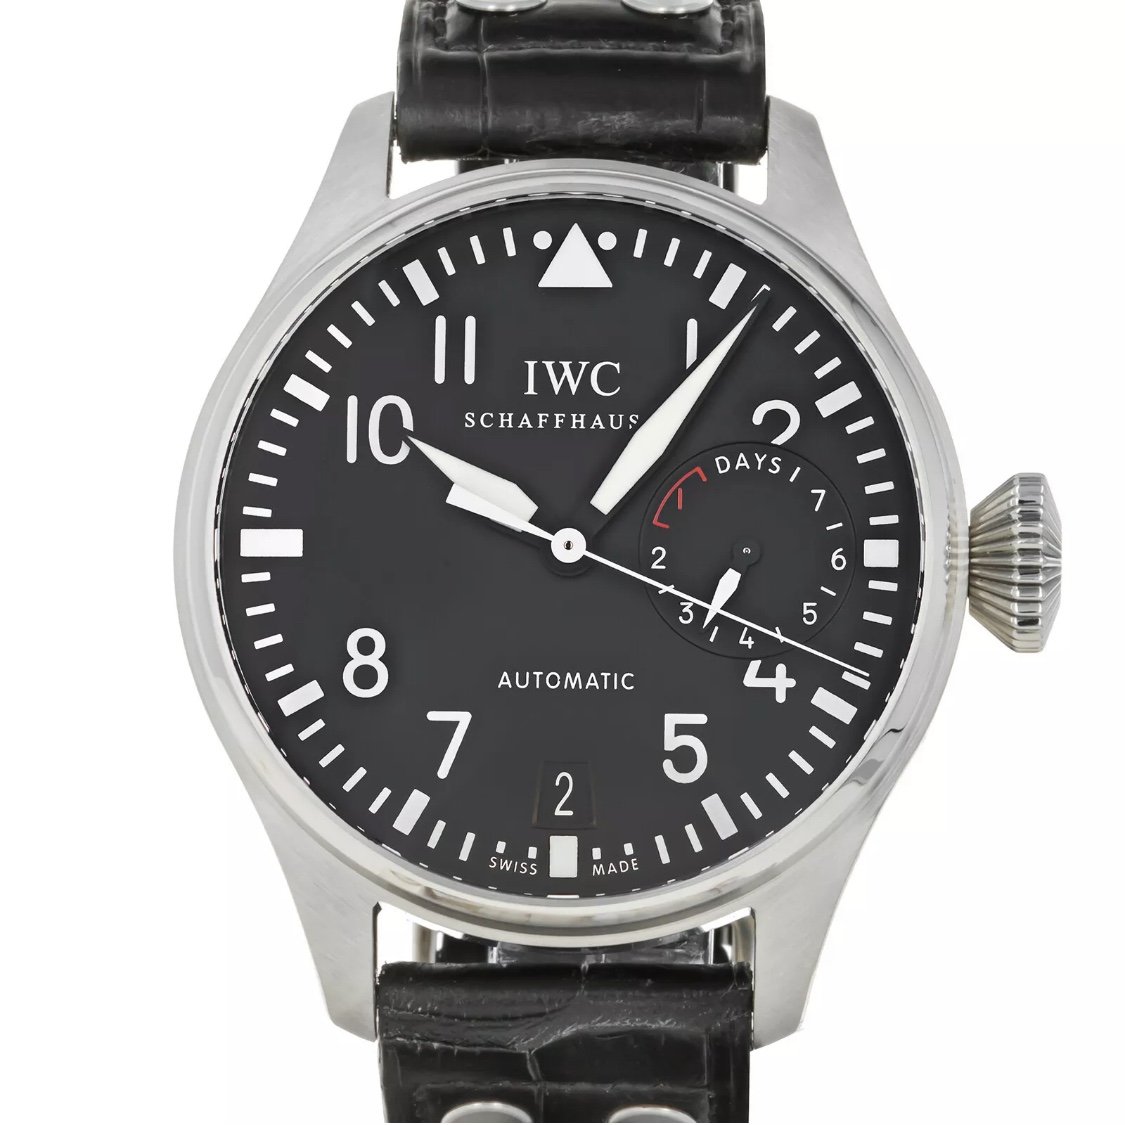 IWC Big Pilot Stainless Steel 46.2mm Watch 7day Movement $14,300 Retail